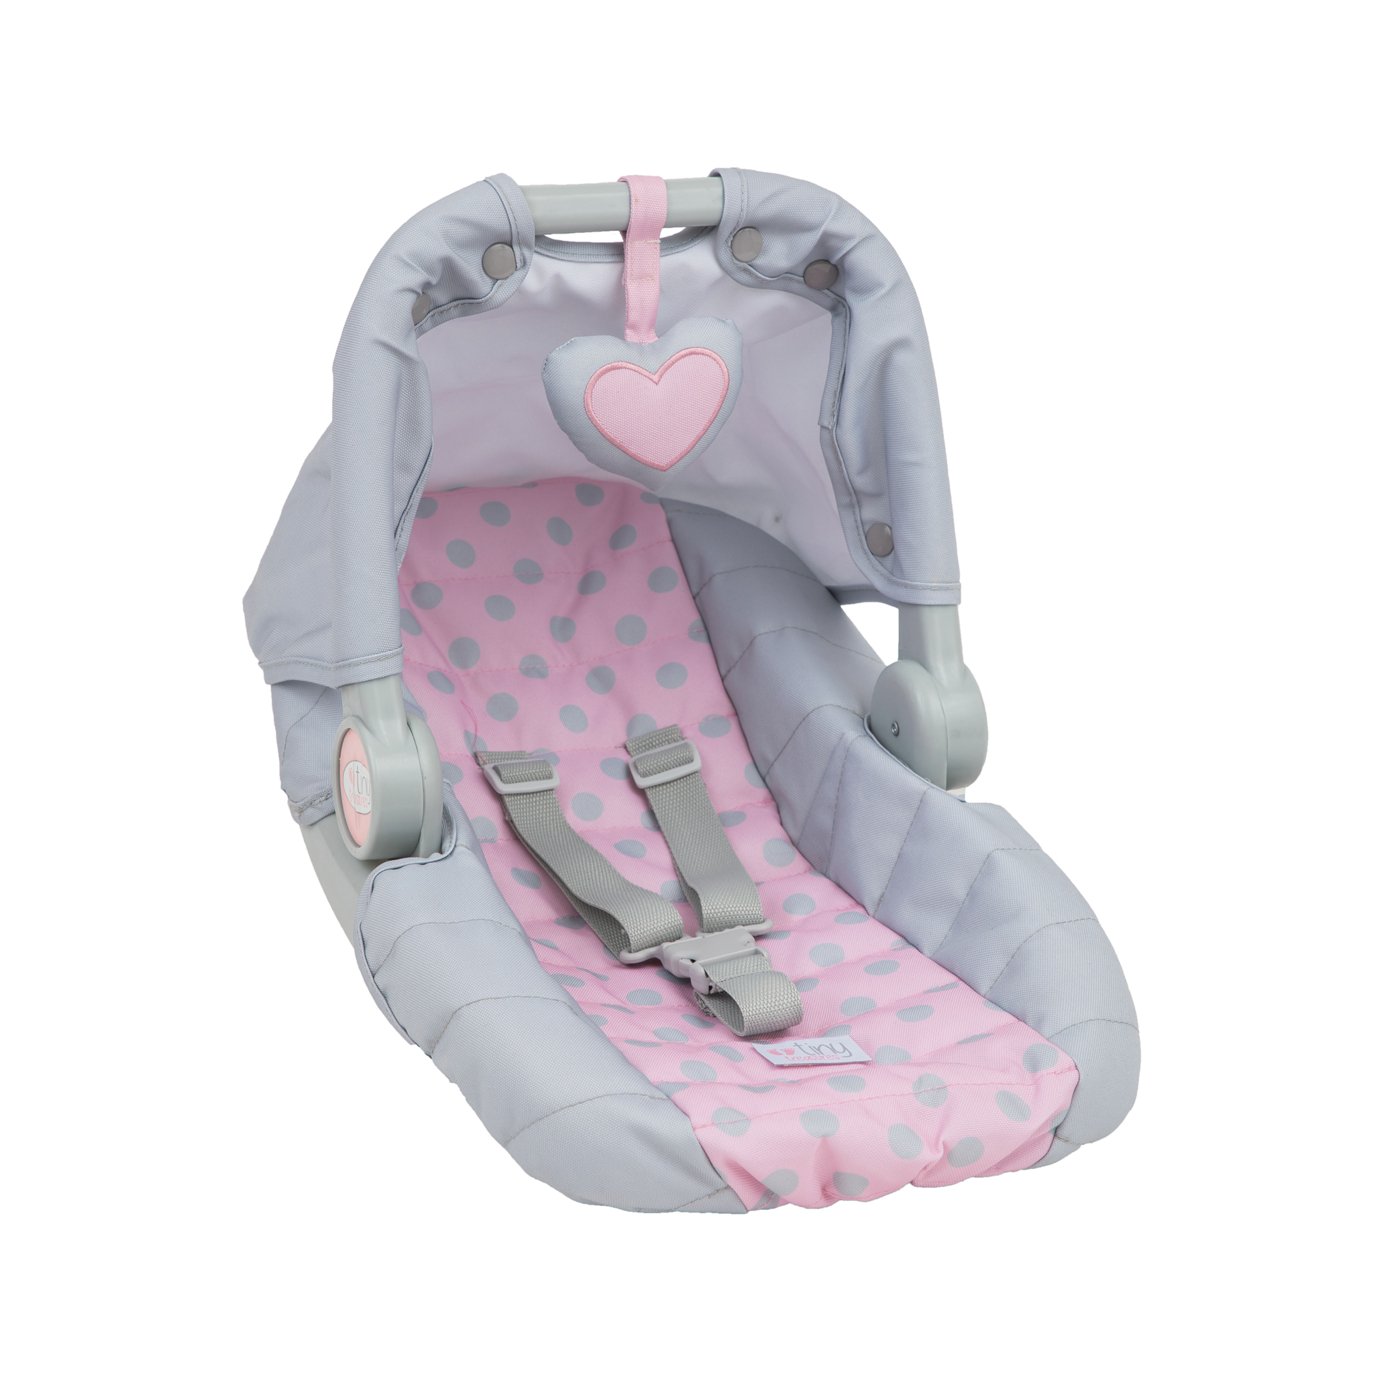 baby car seats for baby dolls